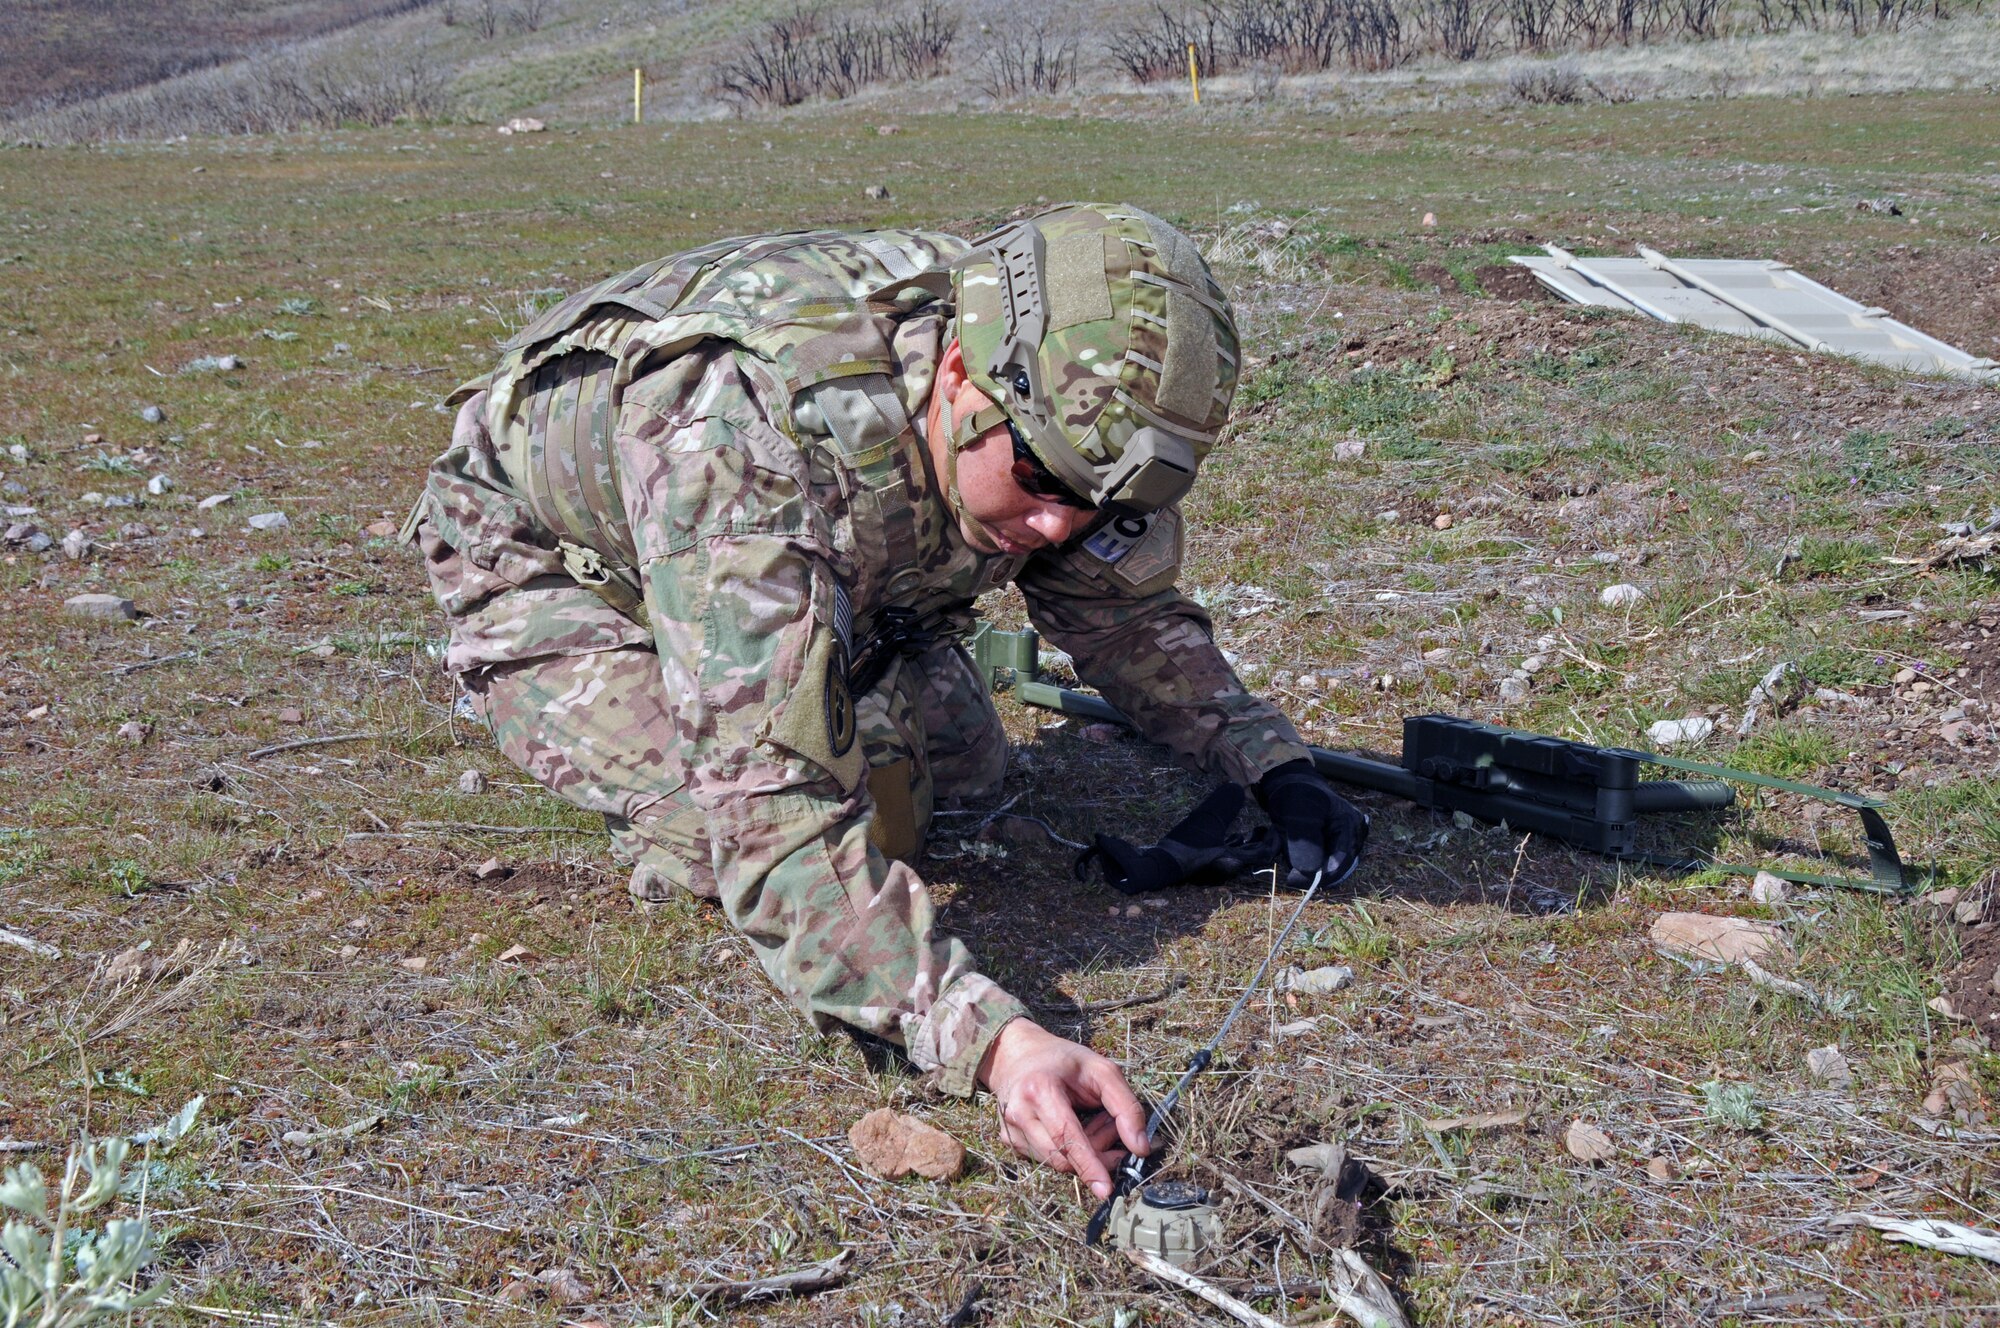 Master Sgt. Timothy Edwards, an explosive ordnance technician with the Utah Air National Guard's 151st Civil Engineering Squadron, prepares to move a simulated landmine at the Improvised Explosive Device Training Lane at Camp Williams, Utah on April 9, 2015. The training scenario conducted with the Utah Army National Guard's 1457th Engineer Battalion was followed by a discussion with Moroccan State Partners. (Air National Guard photo by Staff Sgt. Annie Edwards/RELEASED)